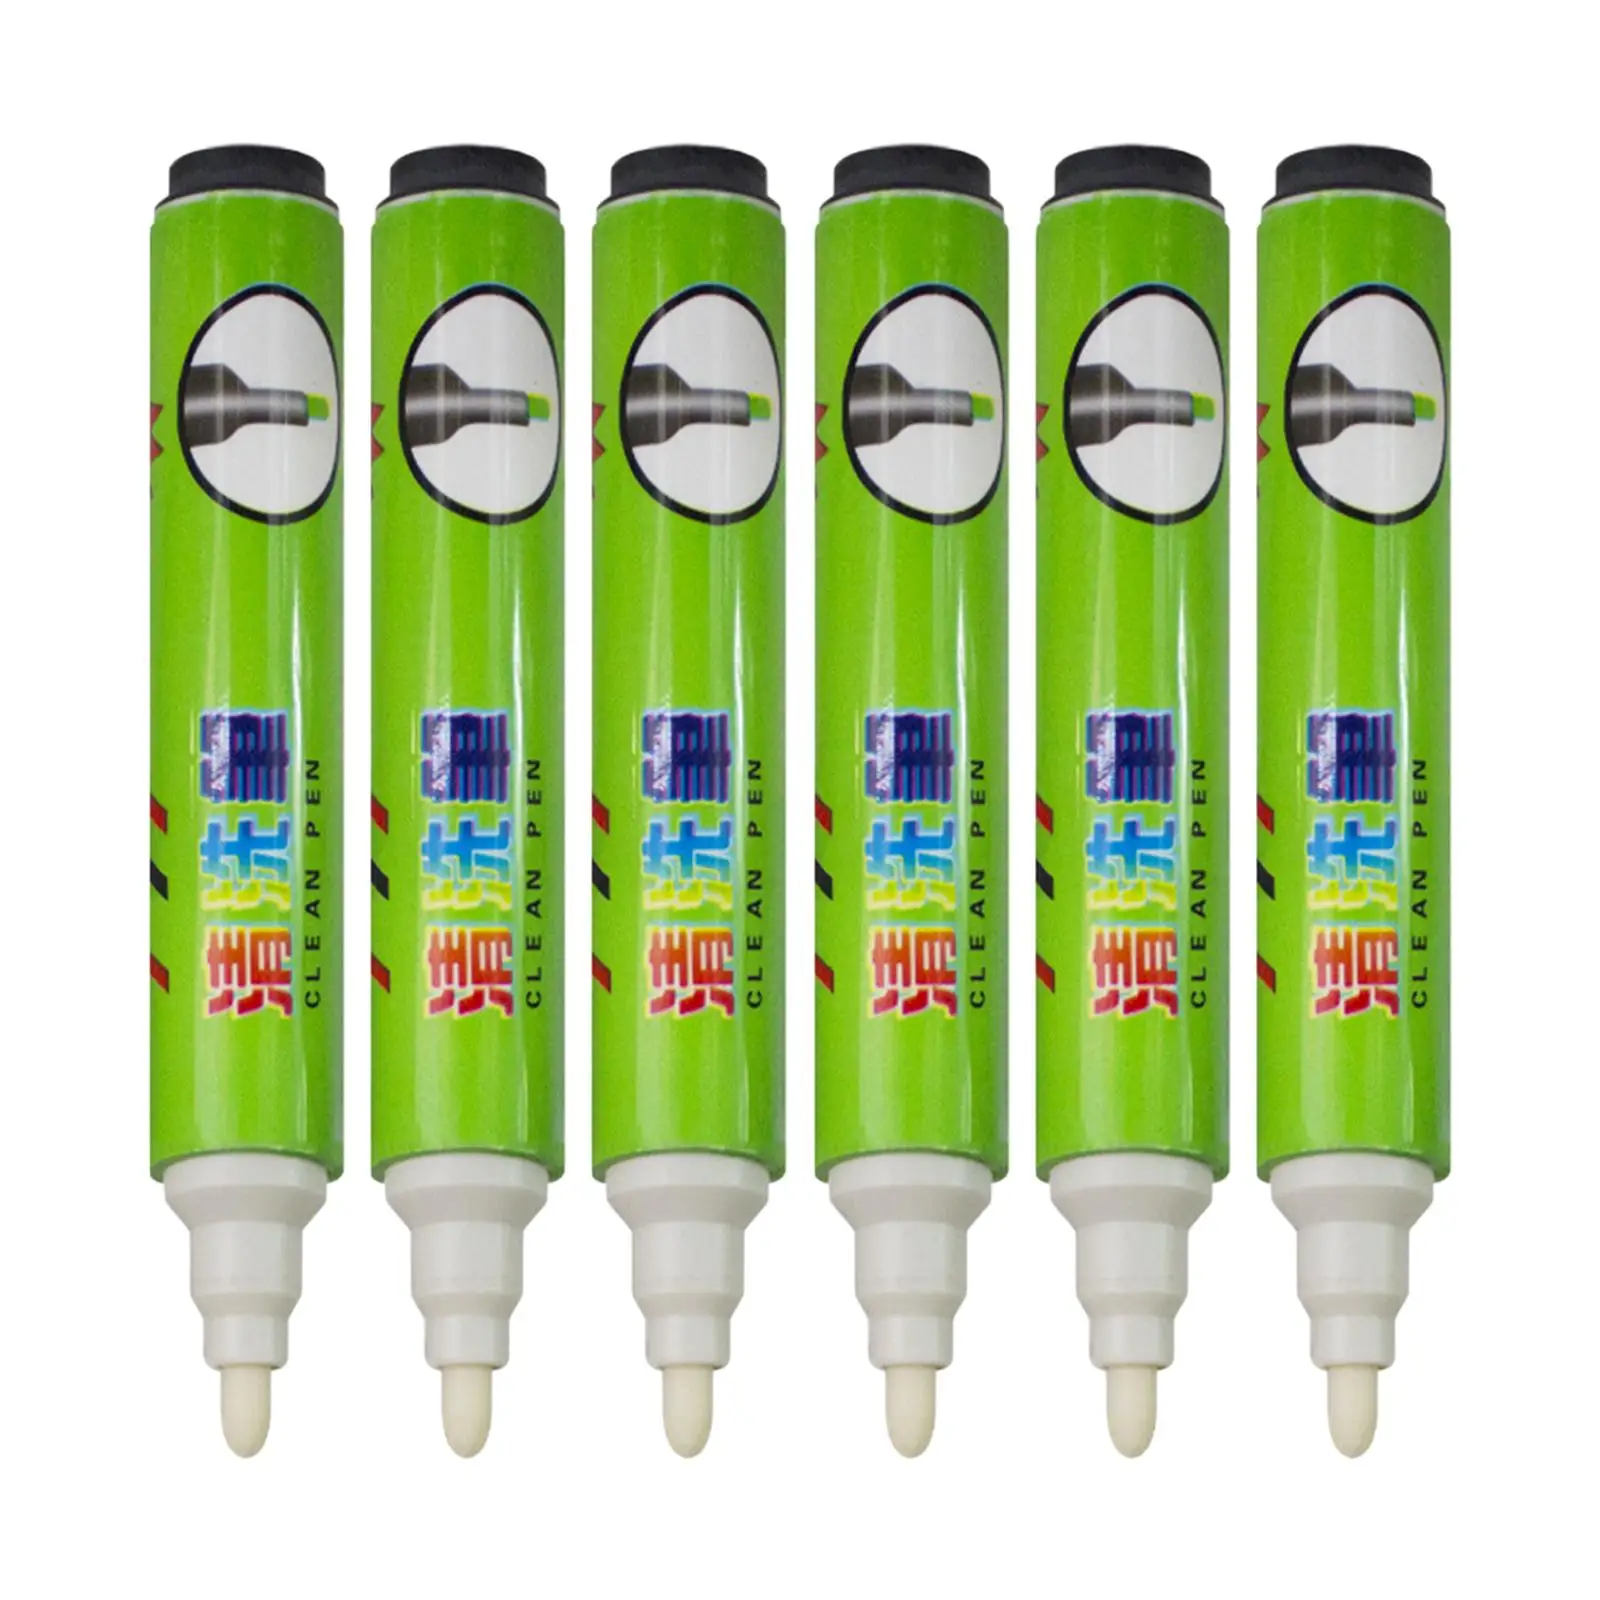 5Pcs Premium Midsole Marker Pen  Refill Handwriting Cleaner Tool for Leather Craft Cloth Shoes Suede